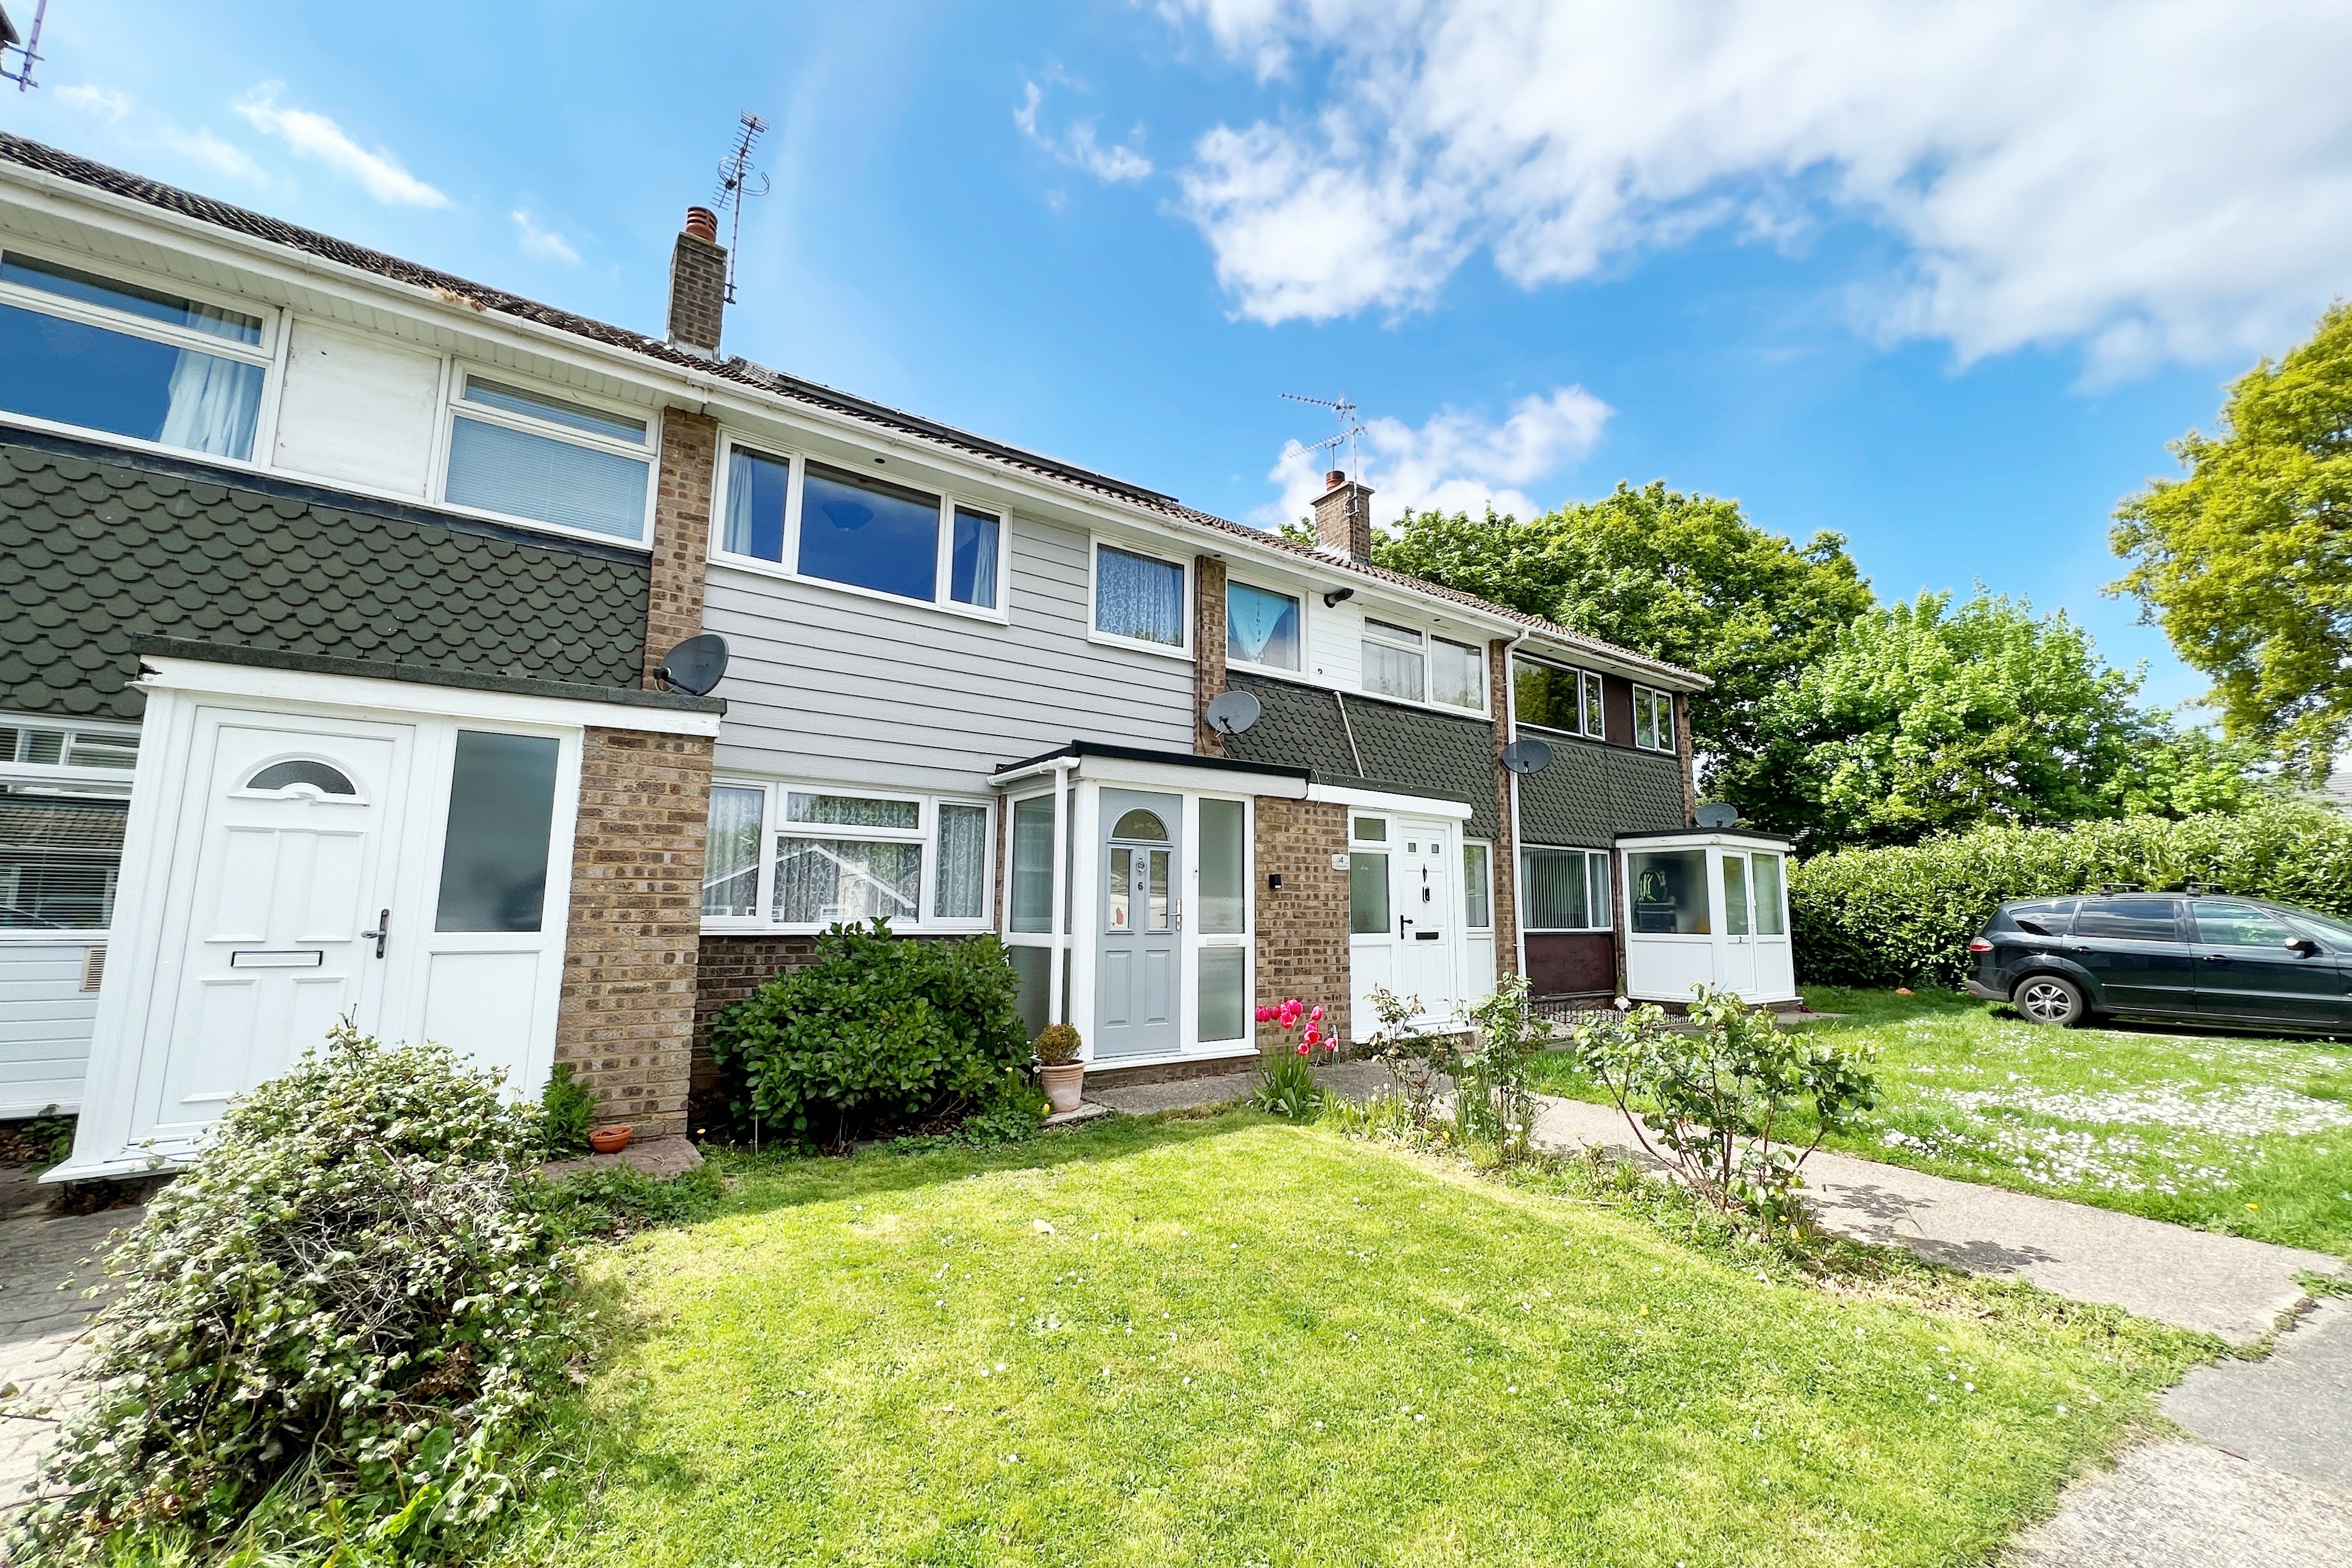 3 bed terraced house for sale in The Rundels, Thundersley, SS7 